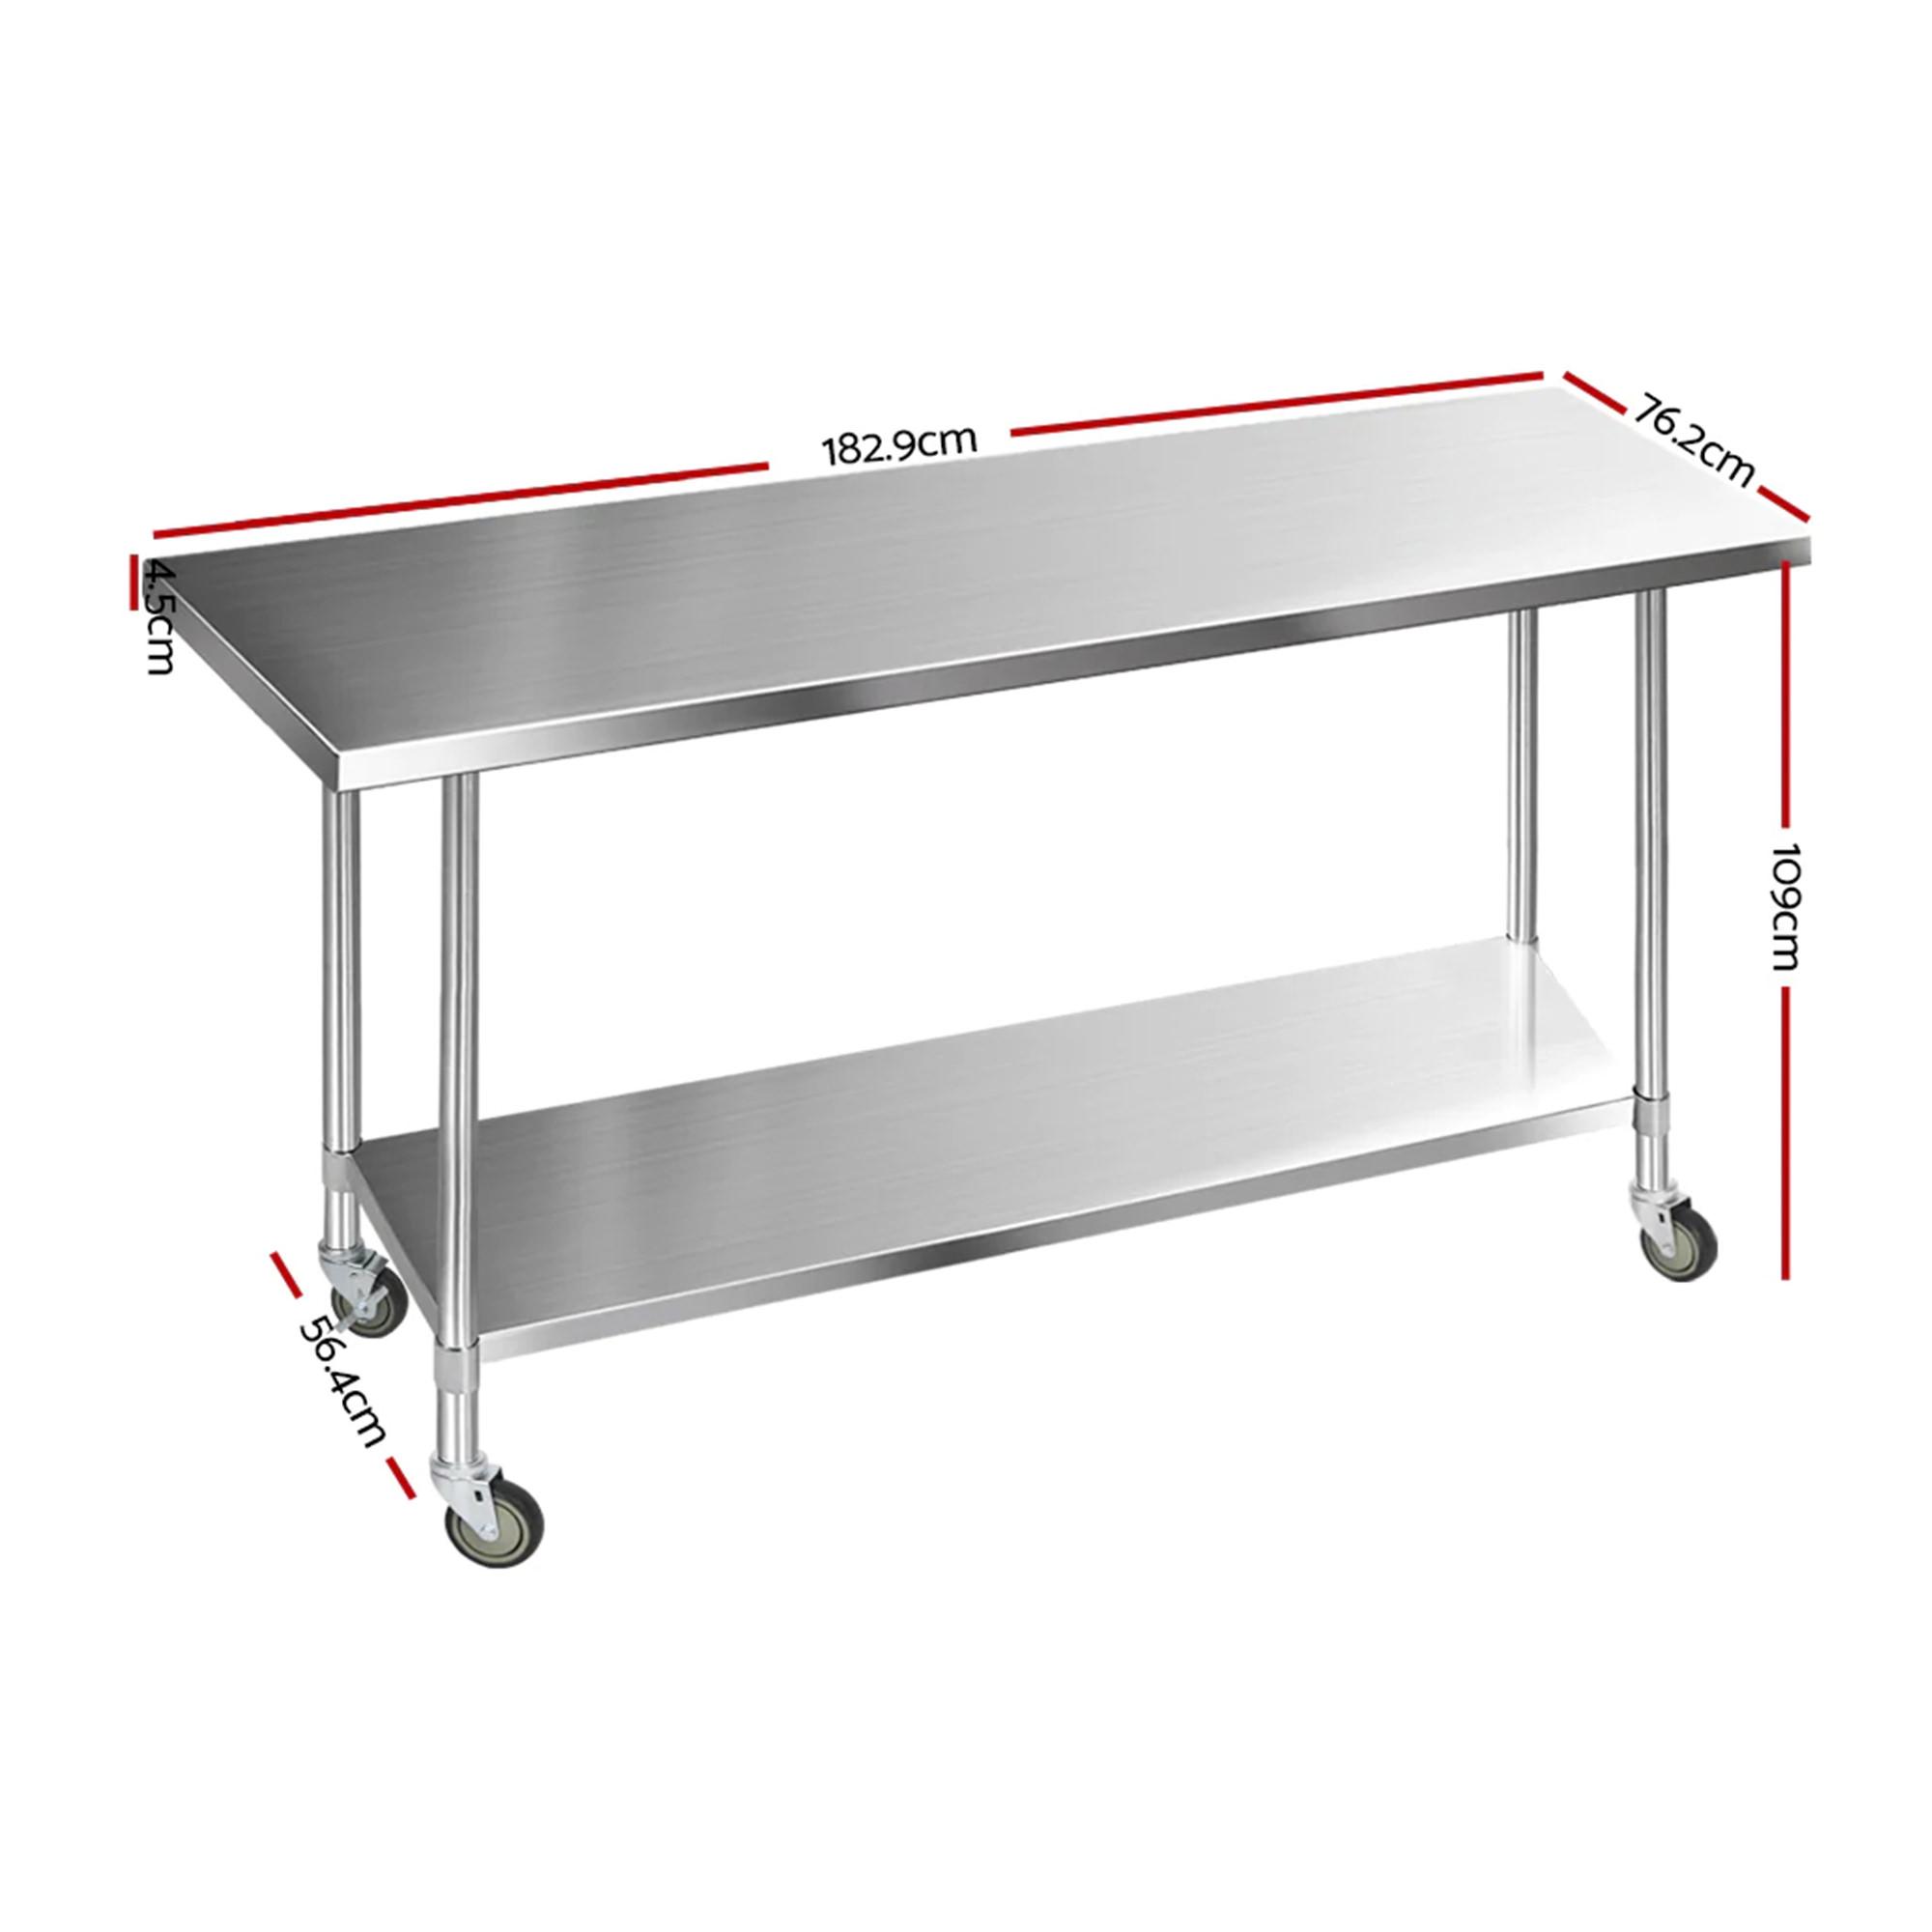 Cefito 430 Stainless Steel Kitchen Bench with Wheels 182.9x76cm Image 3